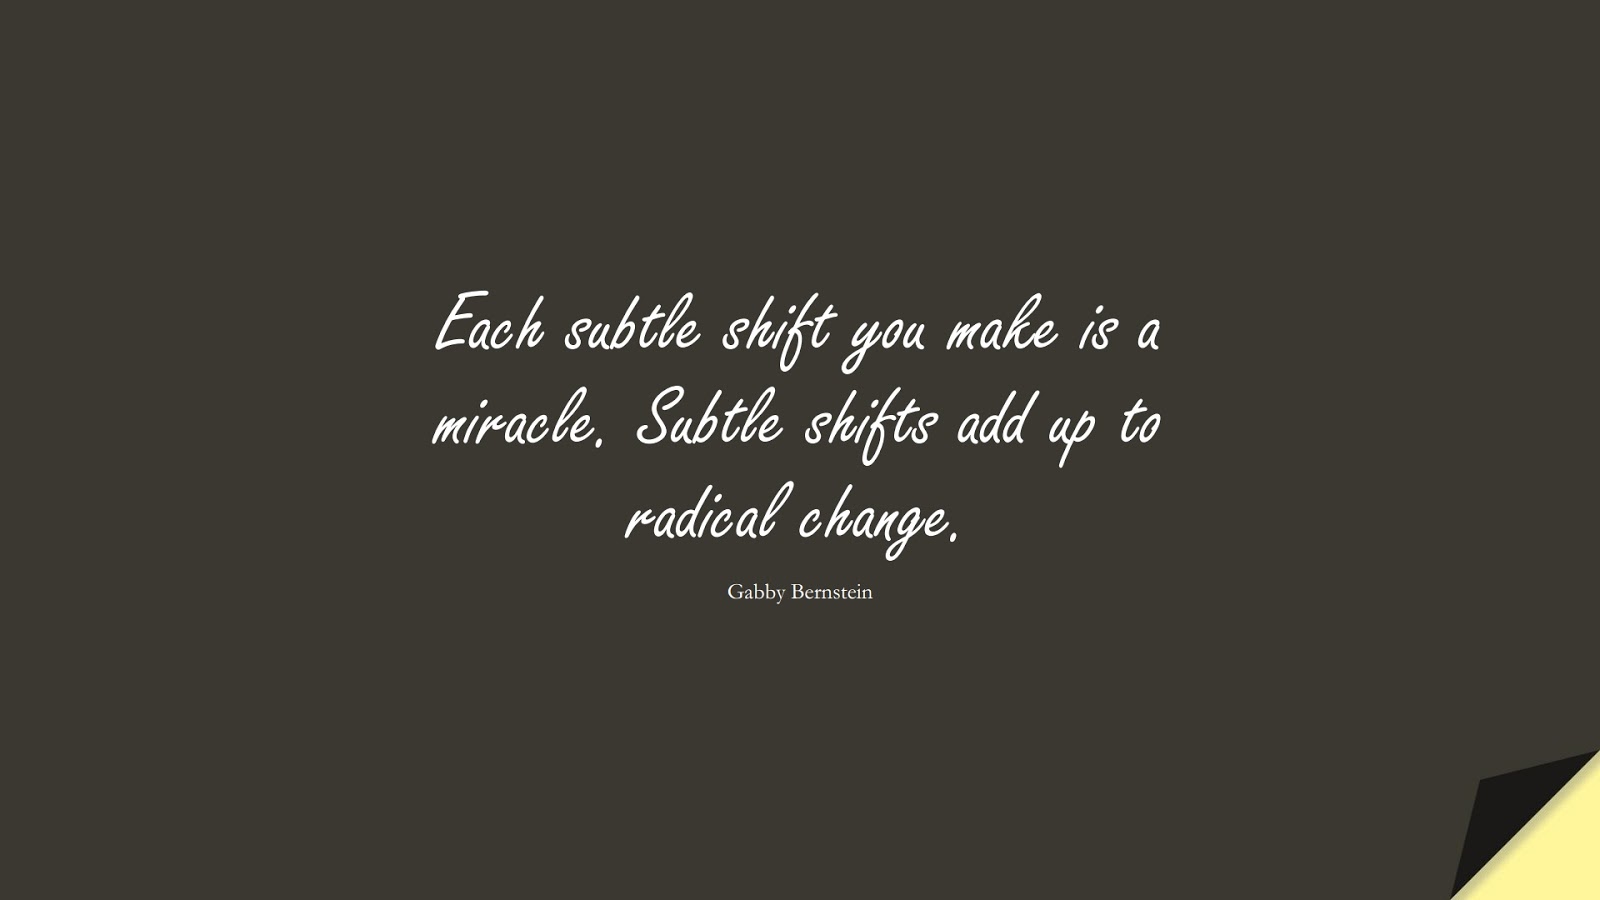 Each subtle shift you make is a miracle. Subtle shifts add up to radical change. (Gabby Bernstein);  #EncouragingQuotes